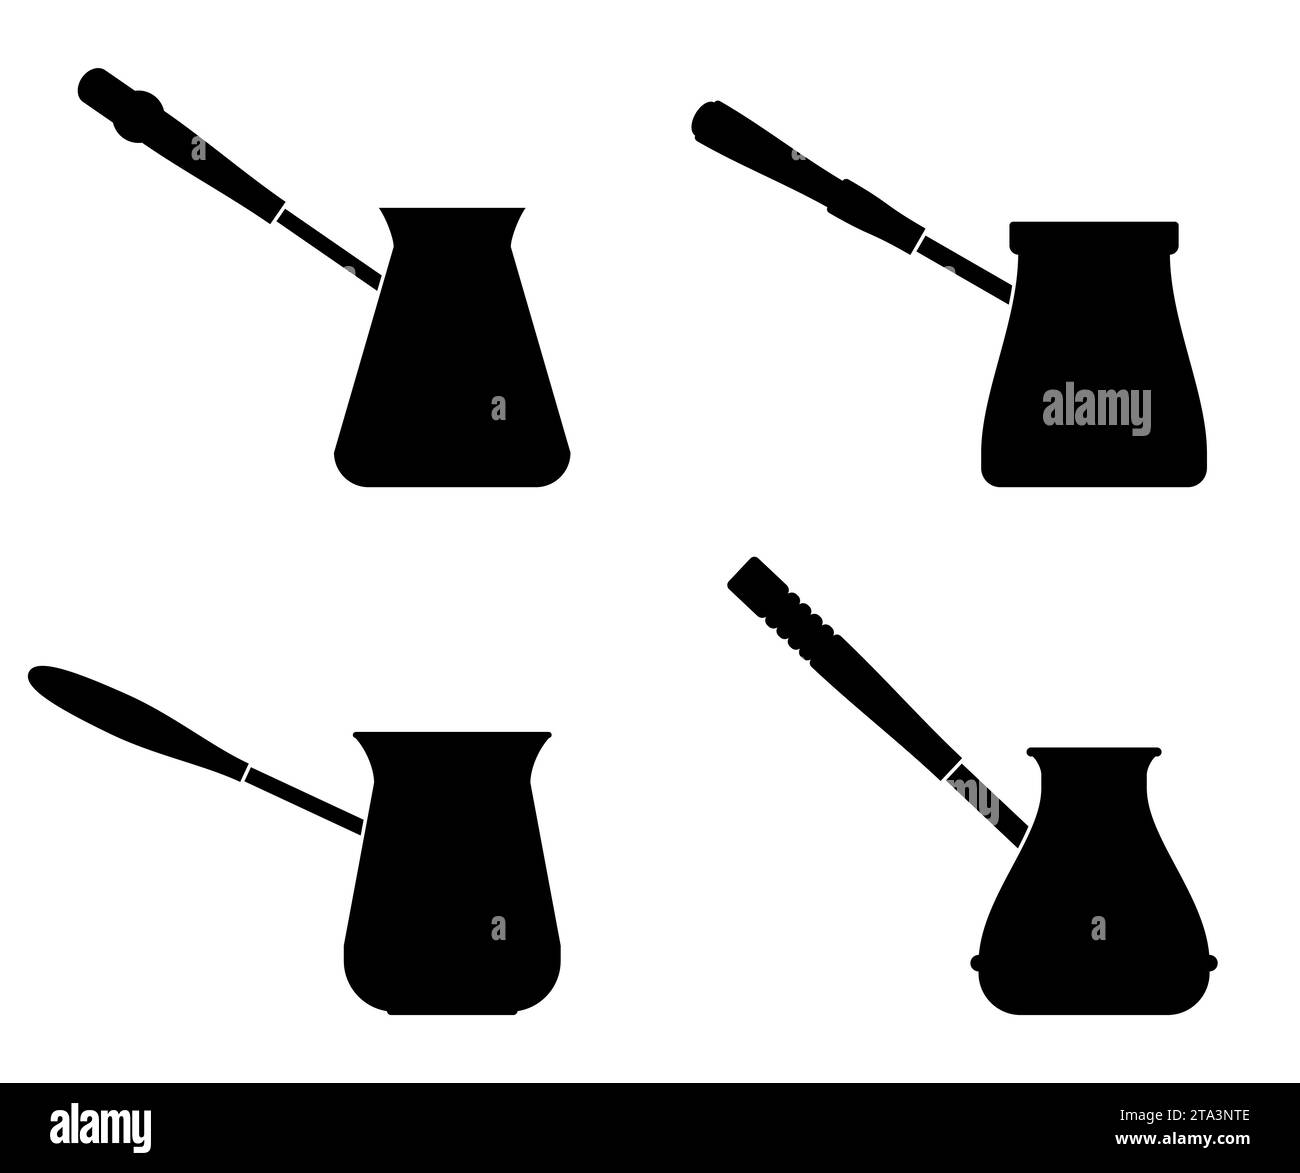 Coffee cezve set icons isolated on white background. Bowl with a handle for making coffee on the stove. Turkish pots of coffee. Hand-drawn coffee make Stock Vector